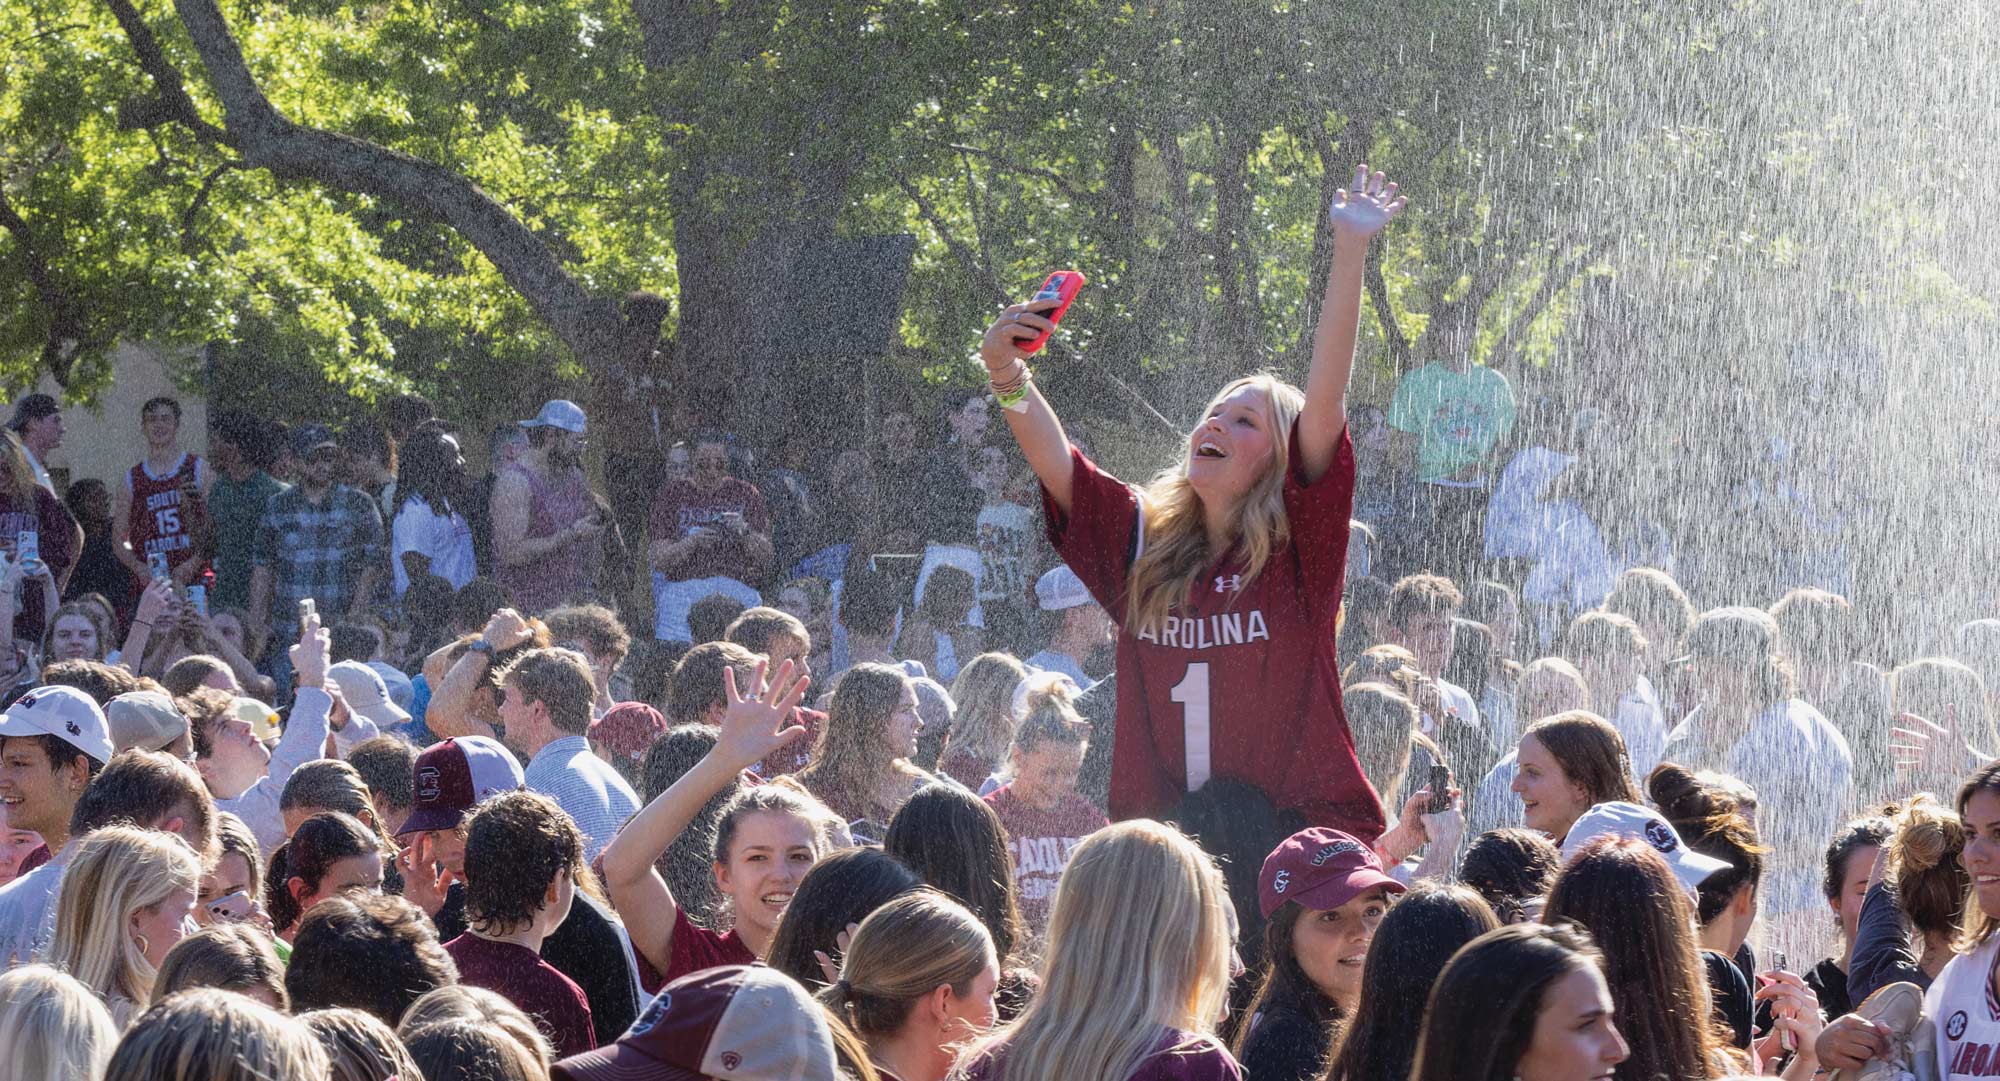 Students celebrate the women’s basketball national championship in the Thomas-Cooper reflecting pond.